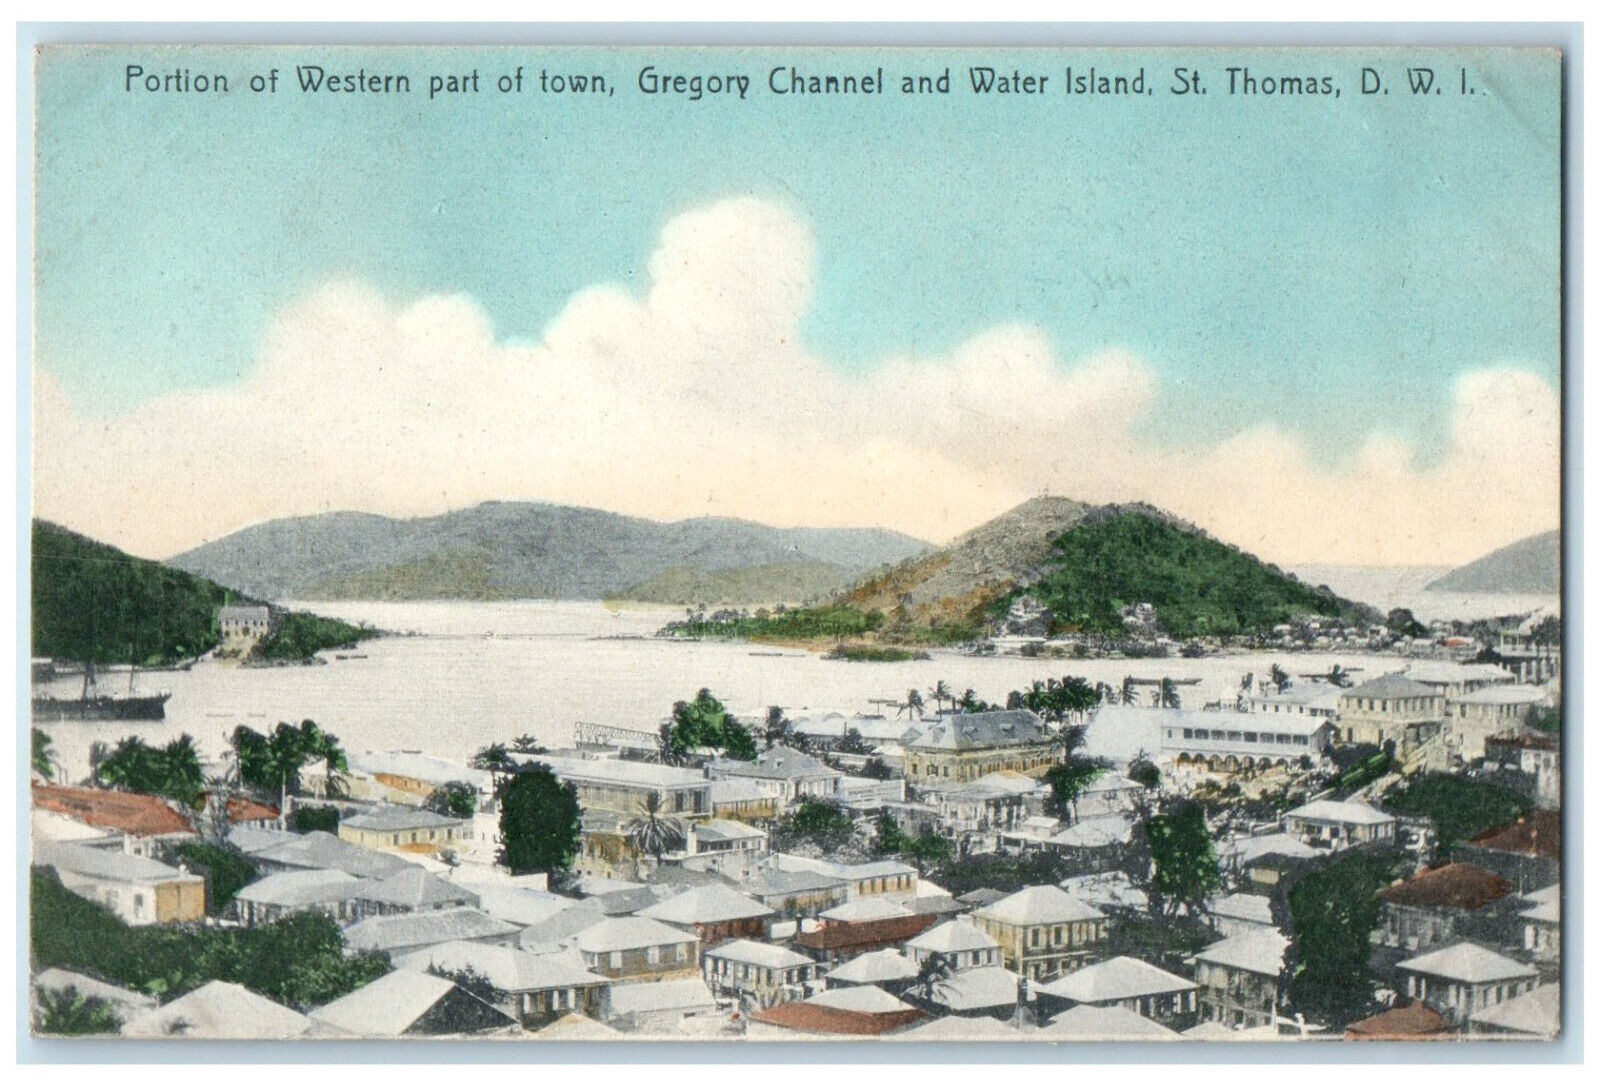 c1910 Portion of Western Part of Town Gregory Channel St. Thomas D.W.I. Postcard